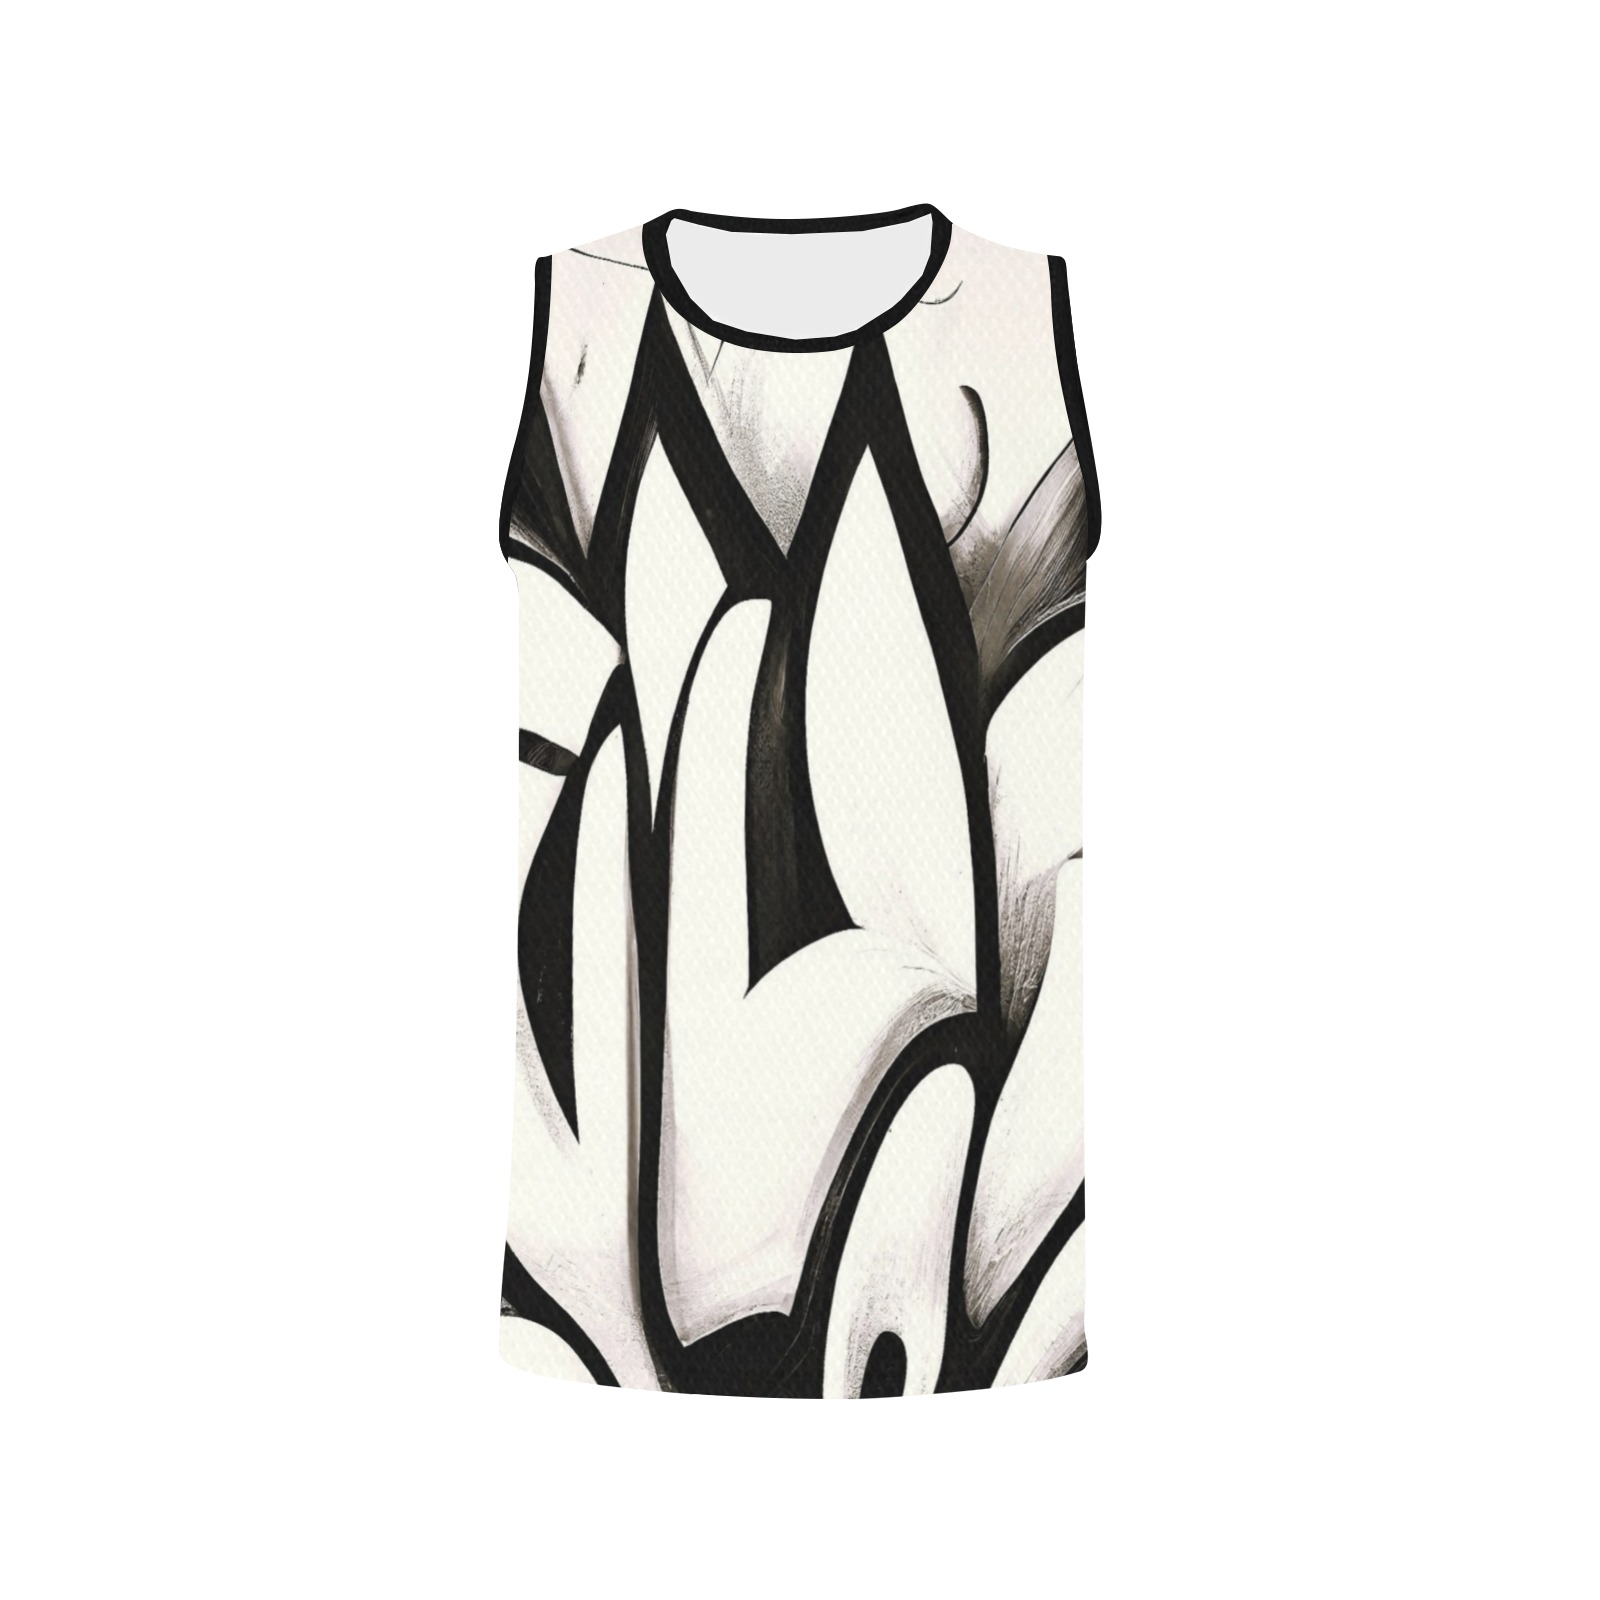 black and white graffiti style All Over Print Basketball Jersey